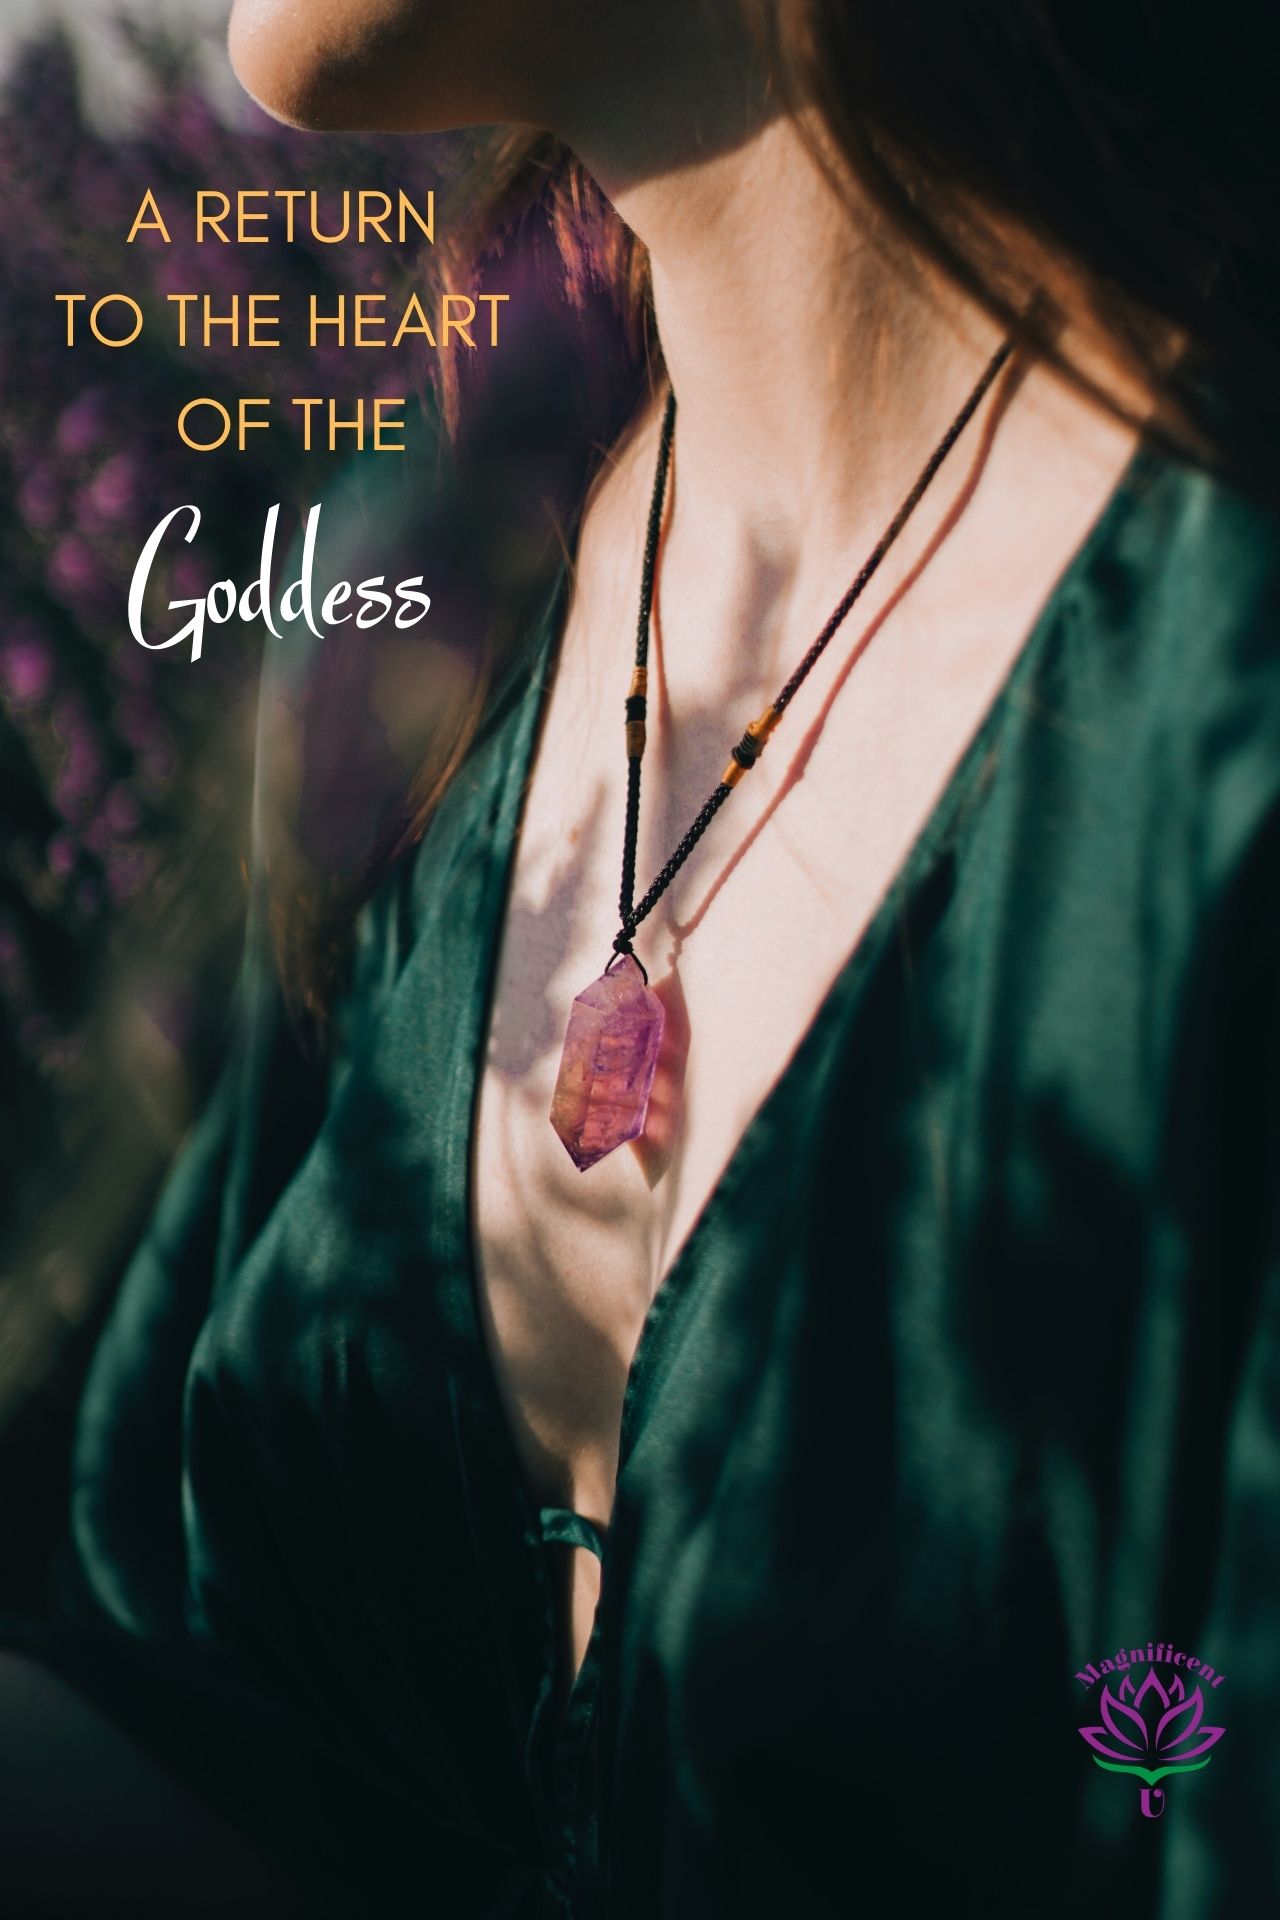 A Return to the Heart of the Goddess